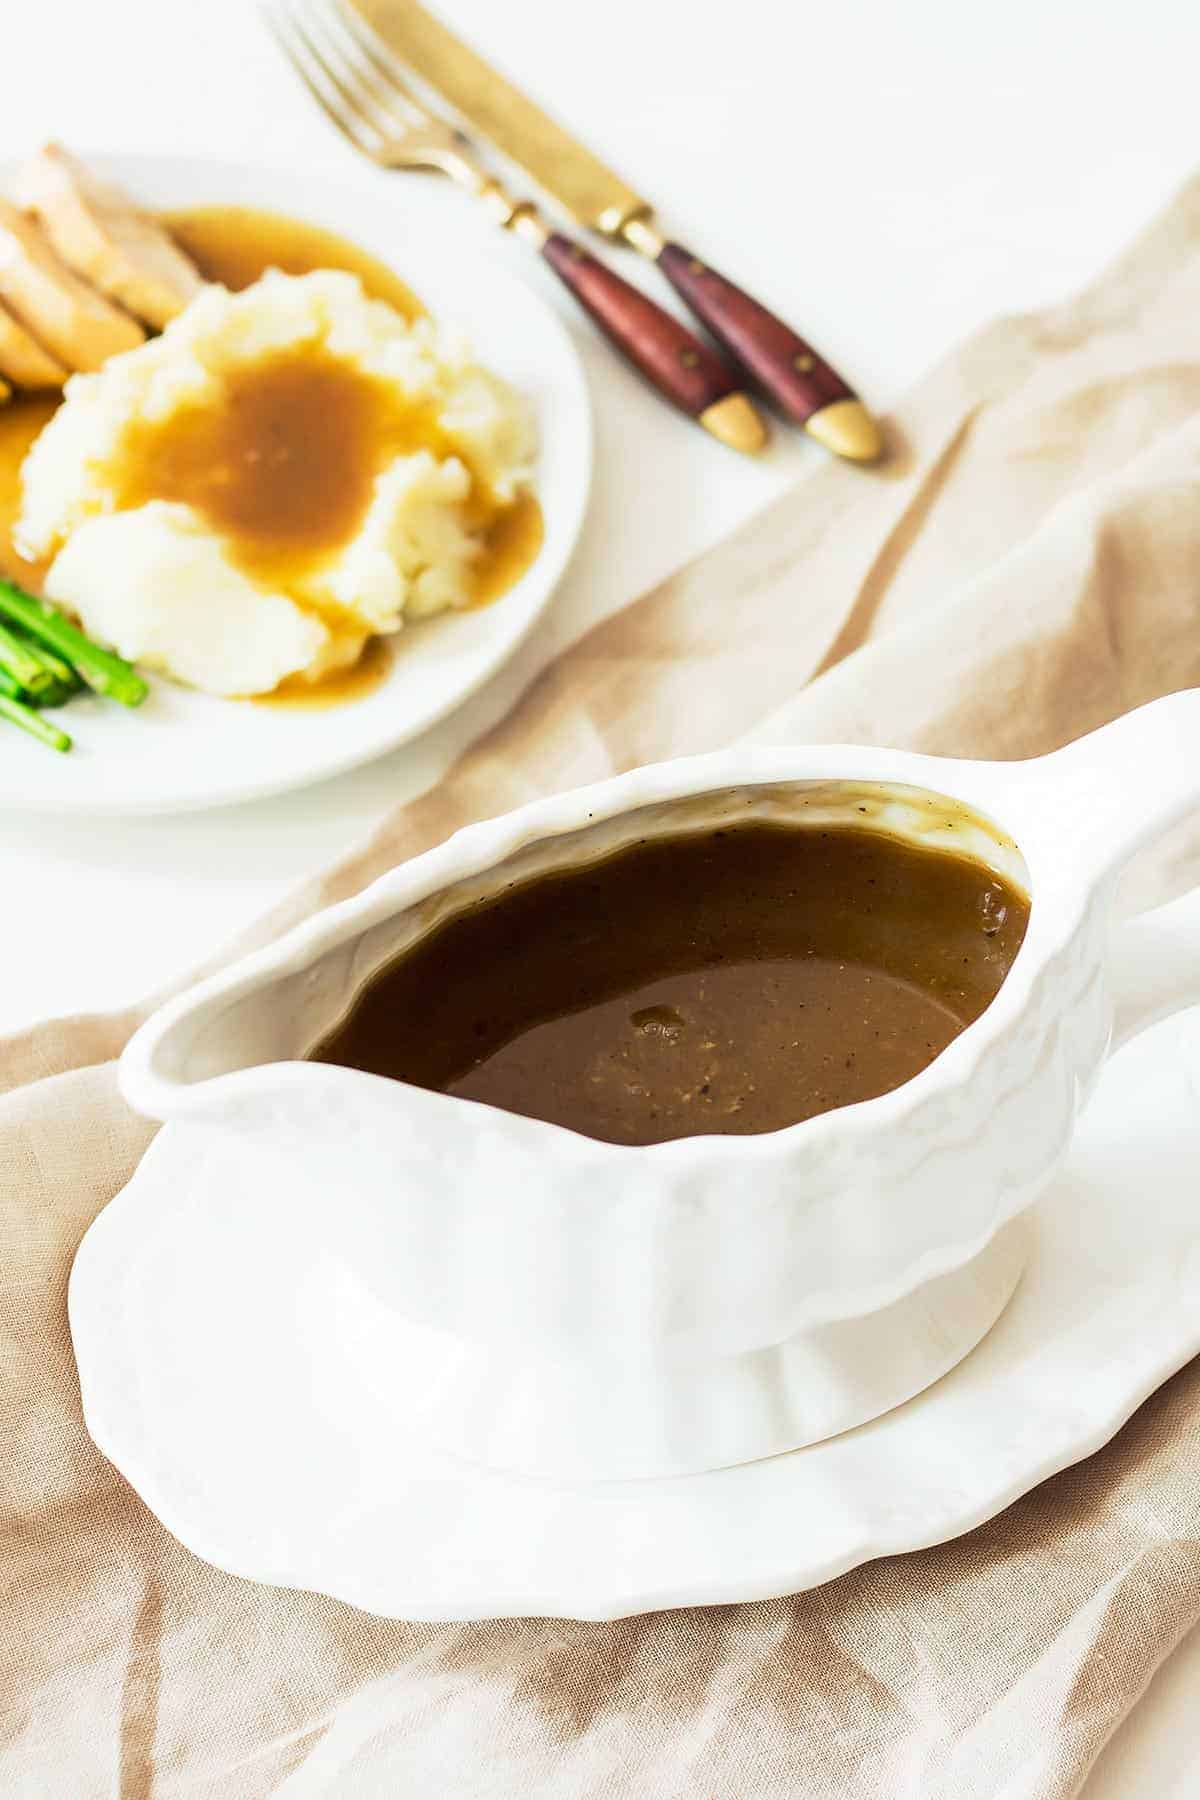 Gravy Boat with Thanksgiving Dinner Plate